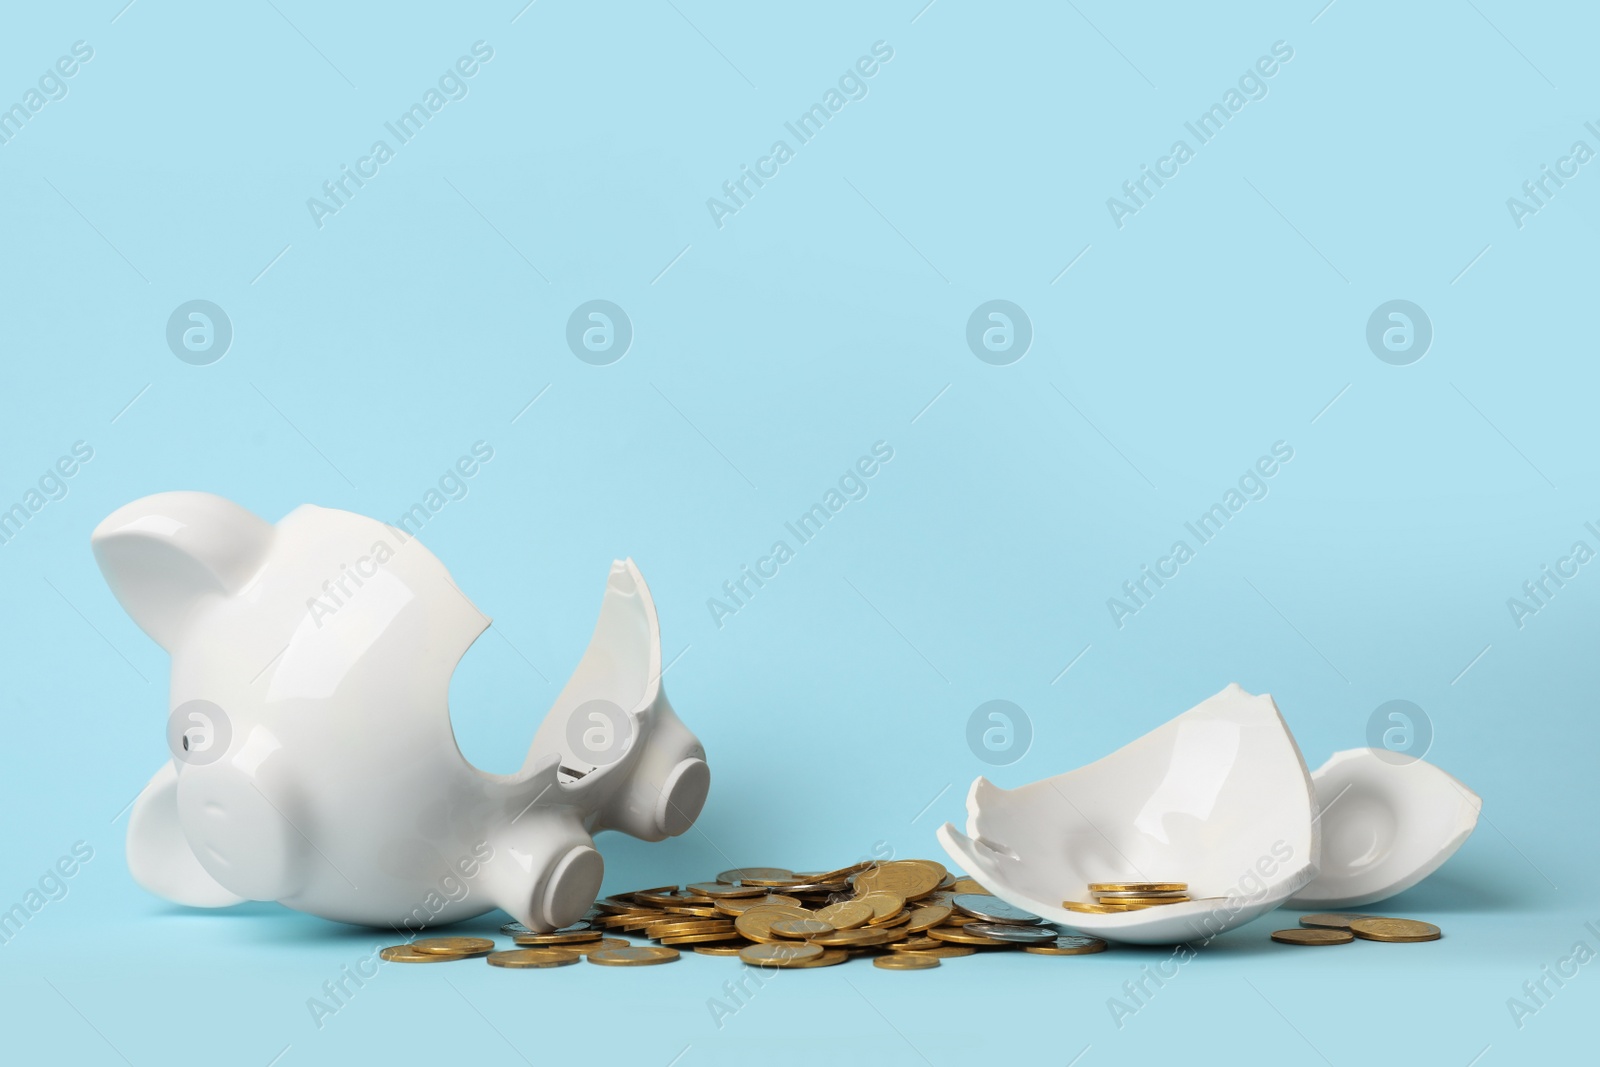 Photo of Broken piggy bank with money on color background